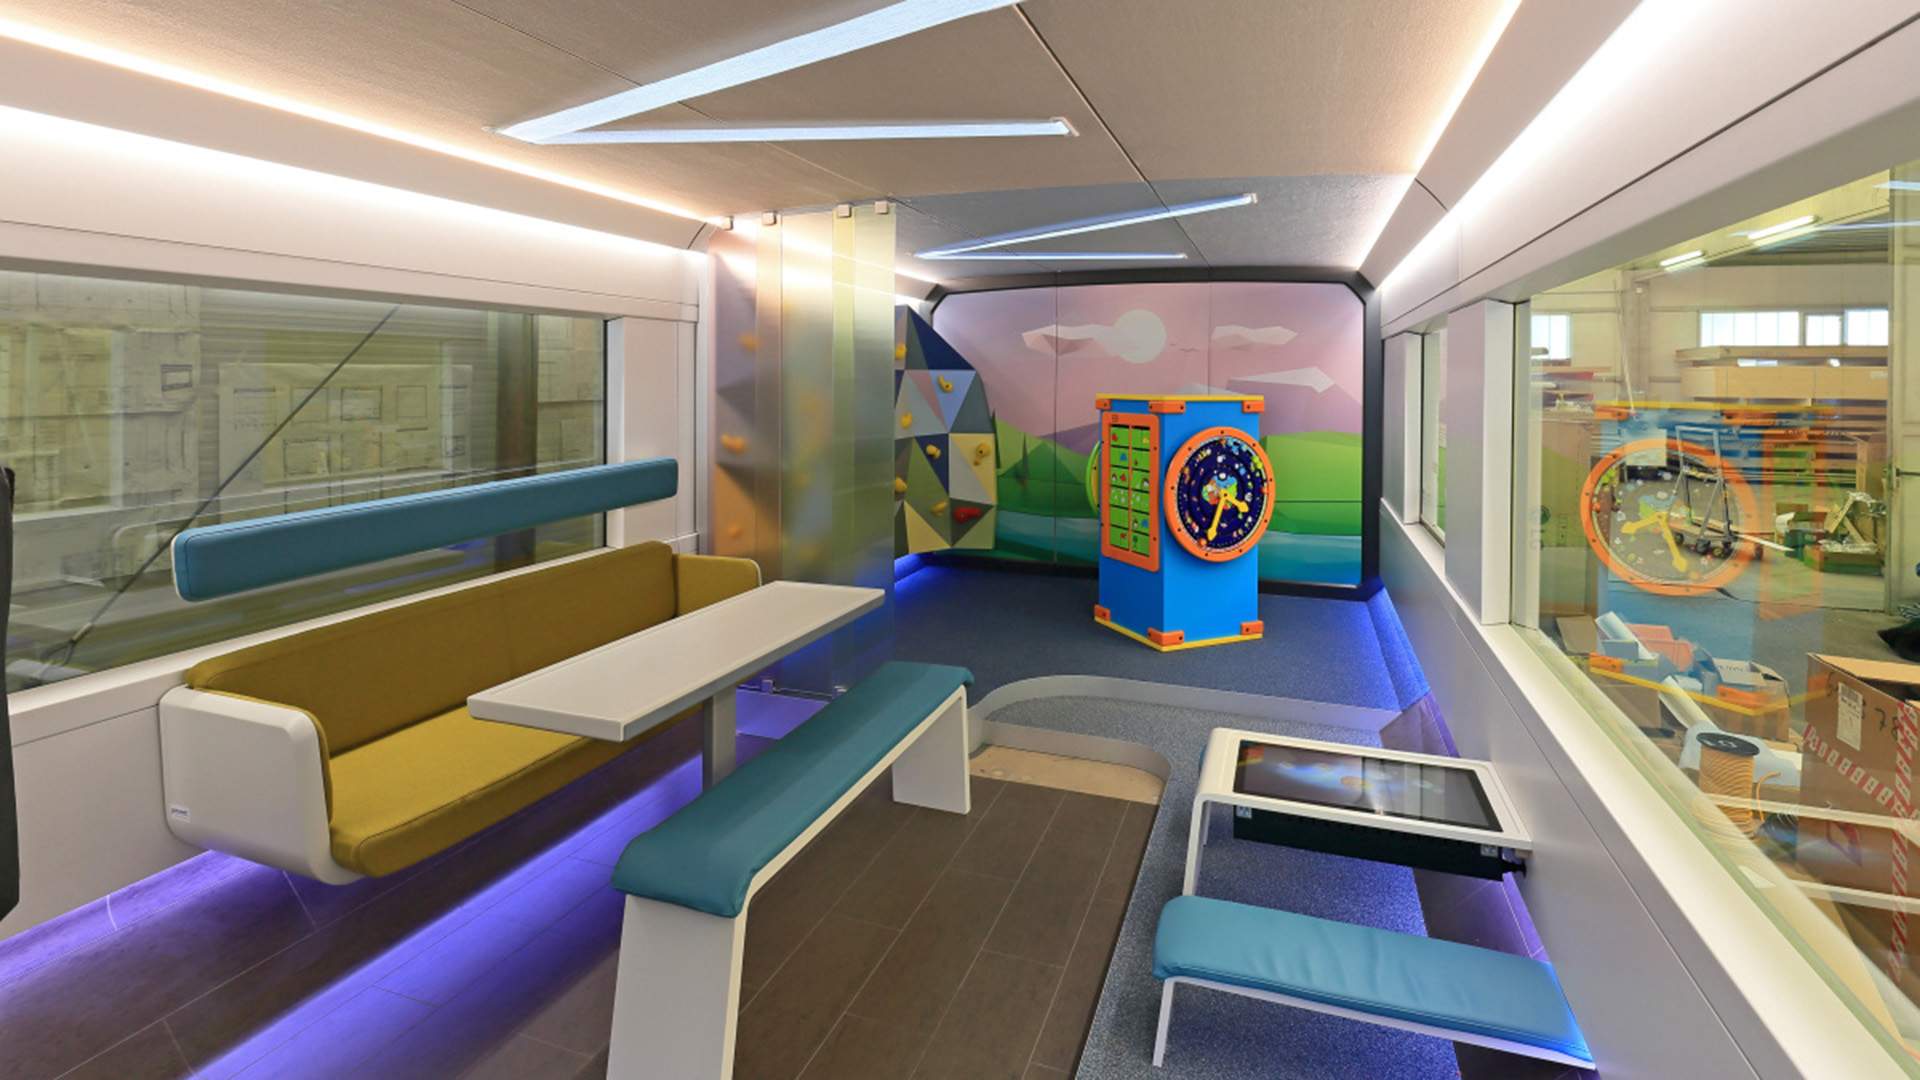 Germany's 'Train of the Future' Features a Gym, Gaming Consoles and Beer on Tap